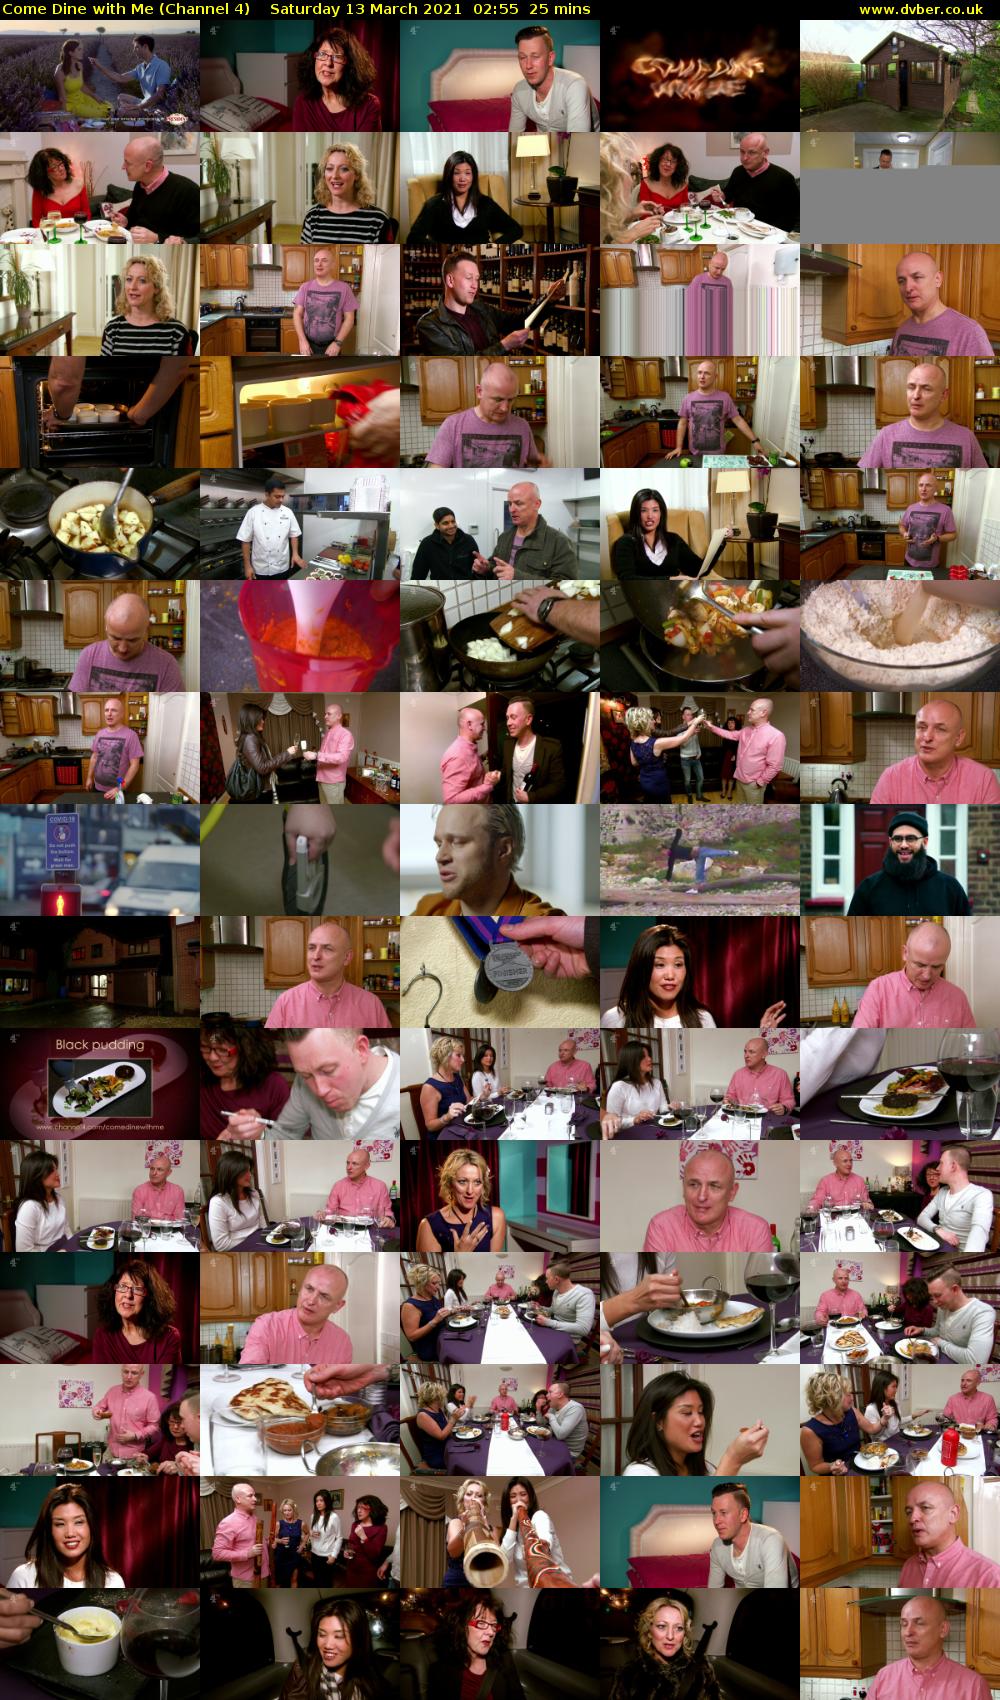 Come Dine with Me (Channel 4) Saturday 13 March 2021 02:55 - 03:20